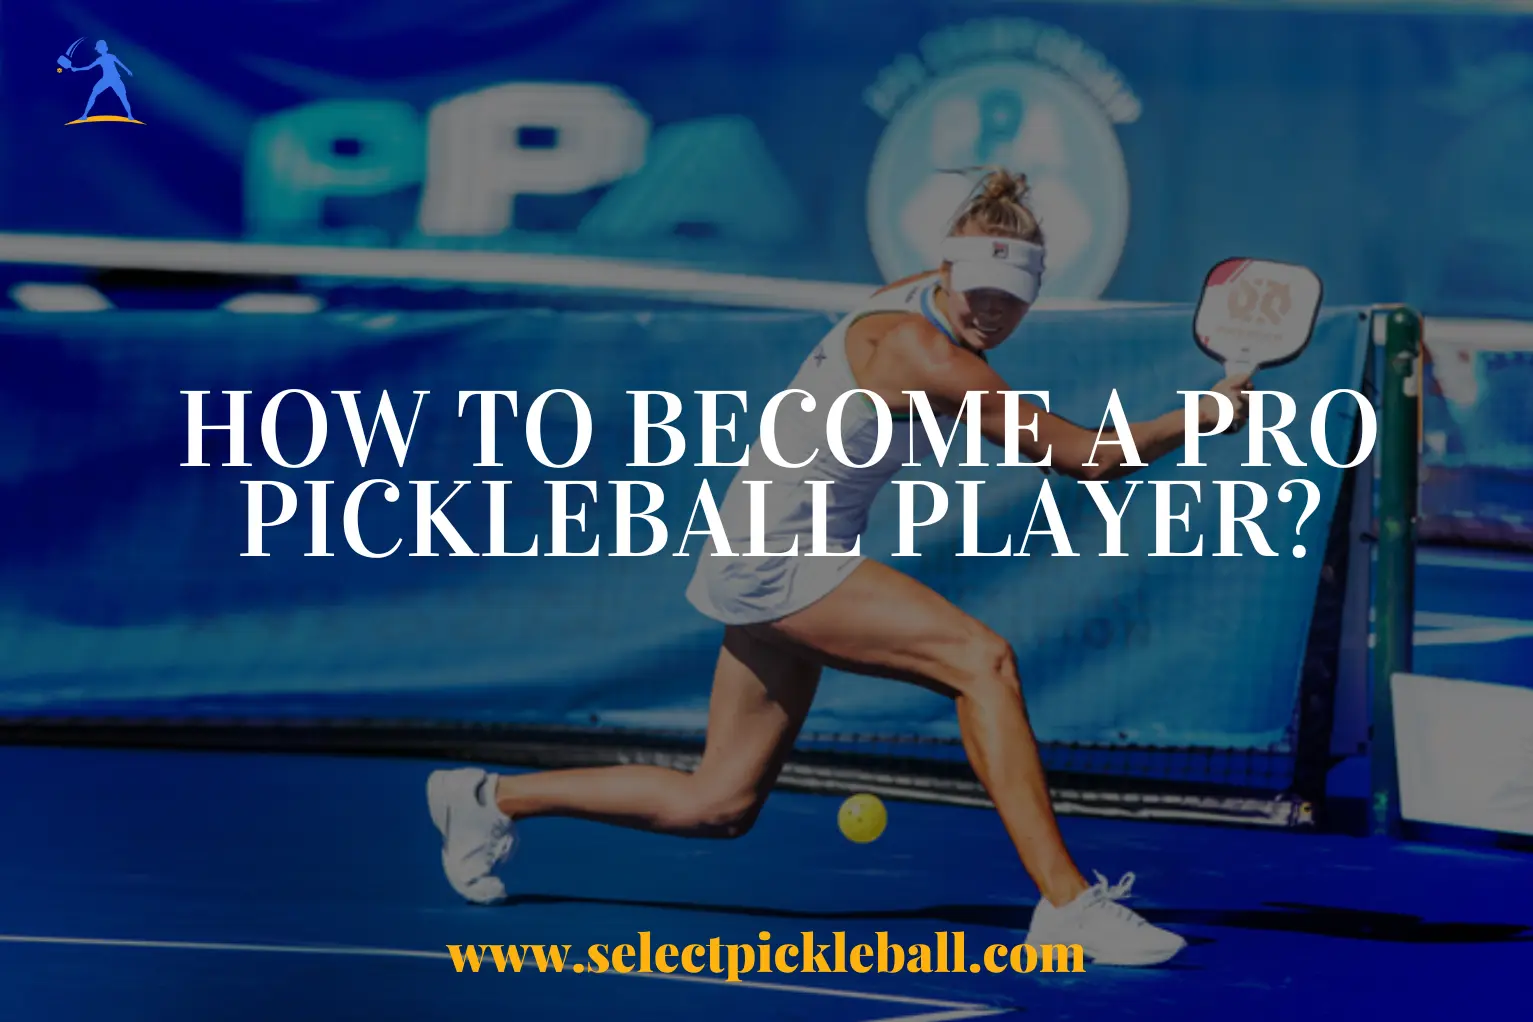 How To Become A Pro Pickleball Player?